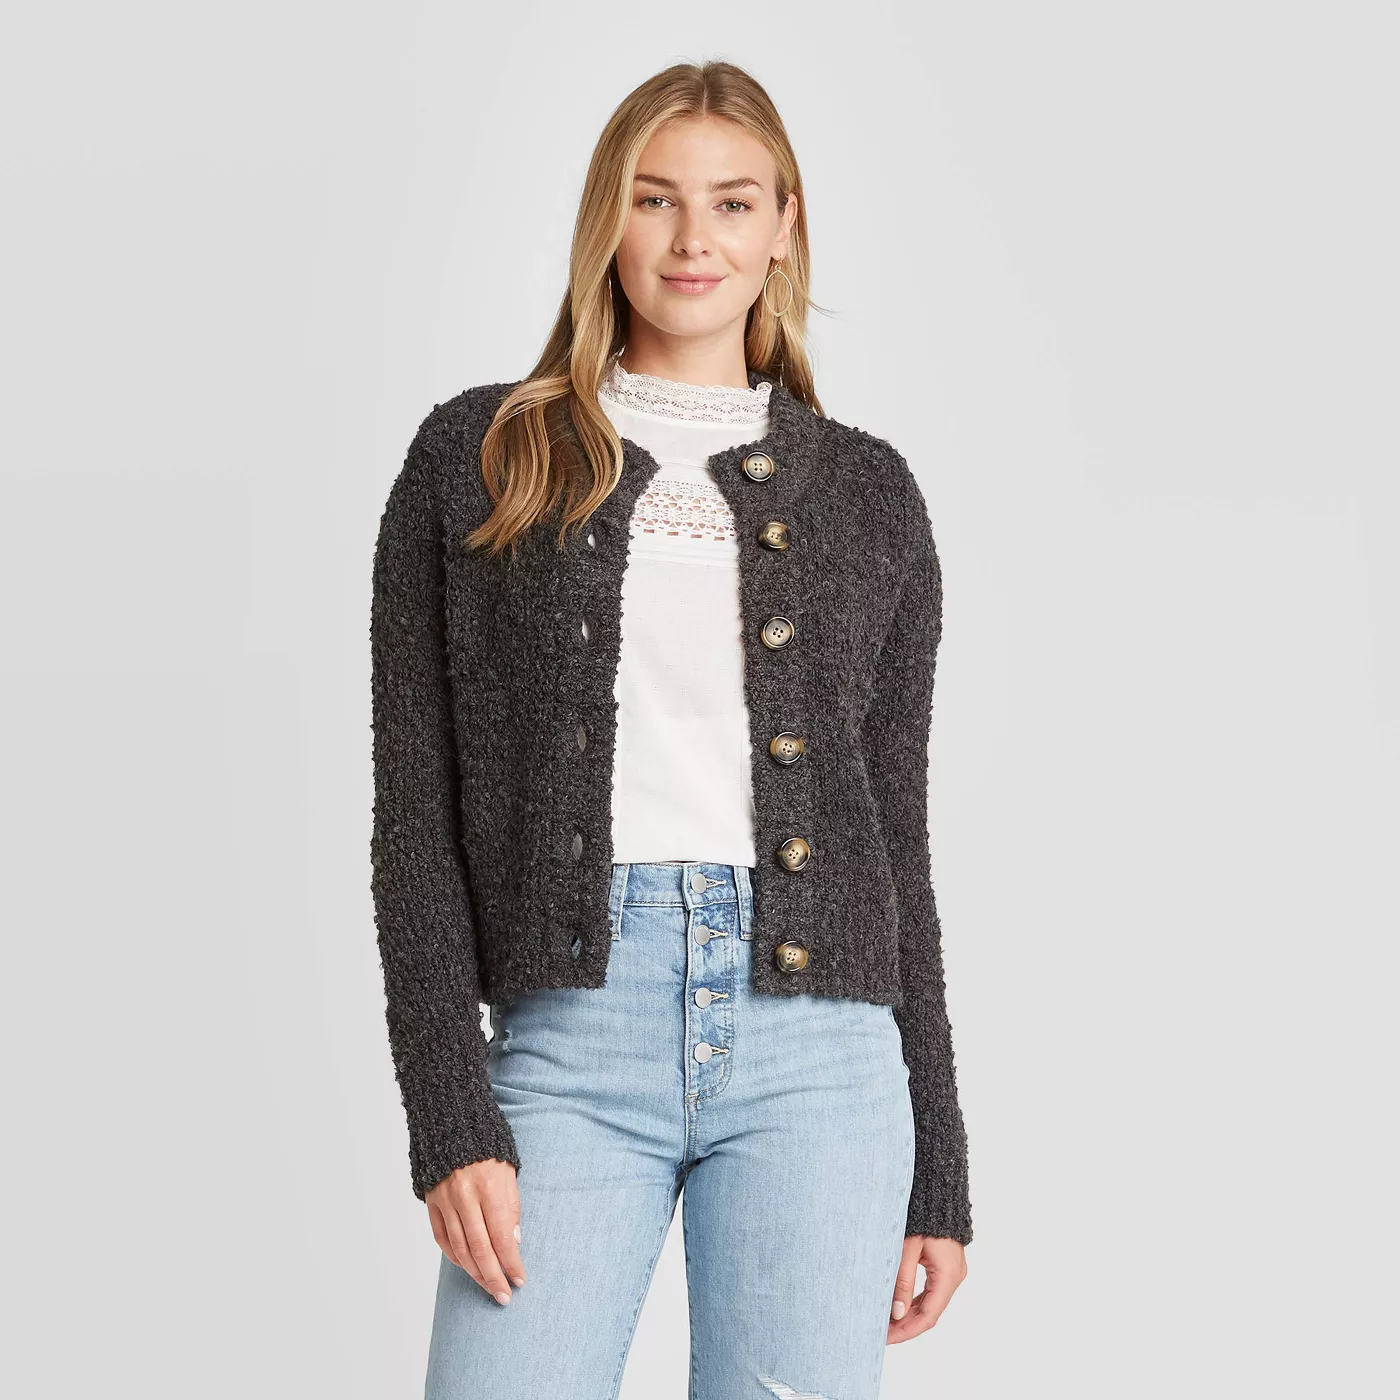 Women's Button-Front Cropped Cardigan - Universal Thread™ - image 1 of 7